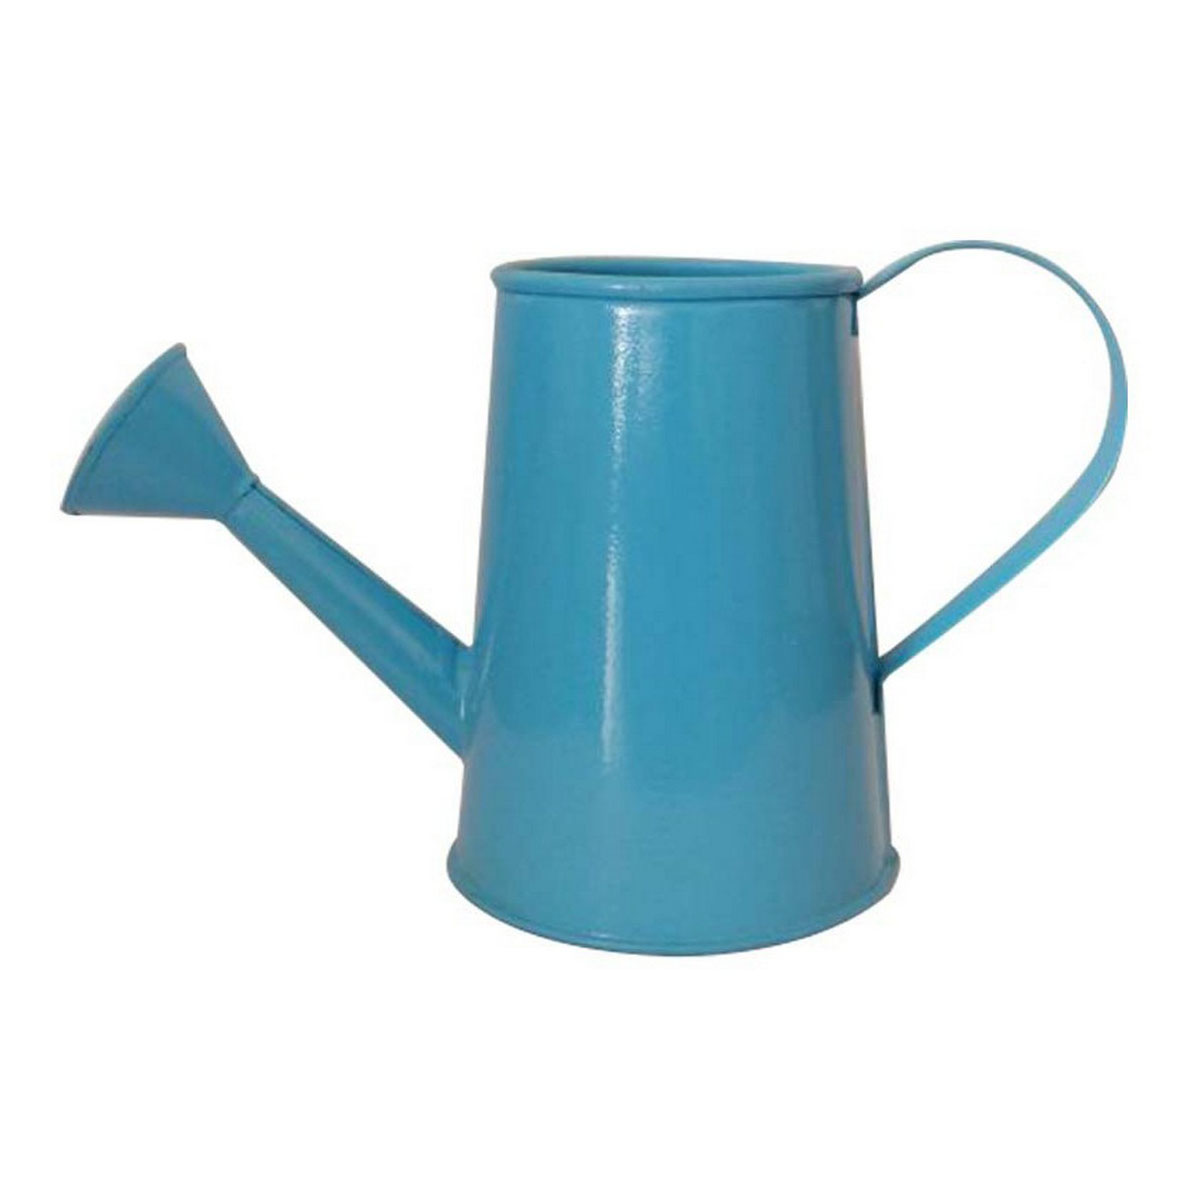 Little Genius - Watering Can with Gardening Tool